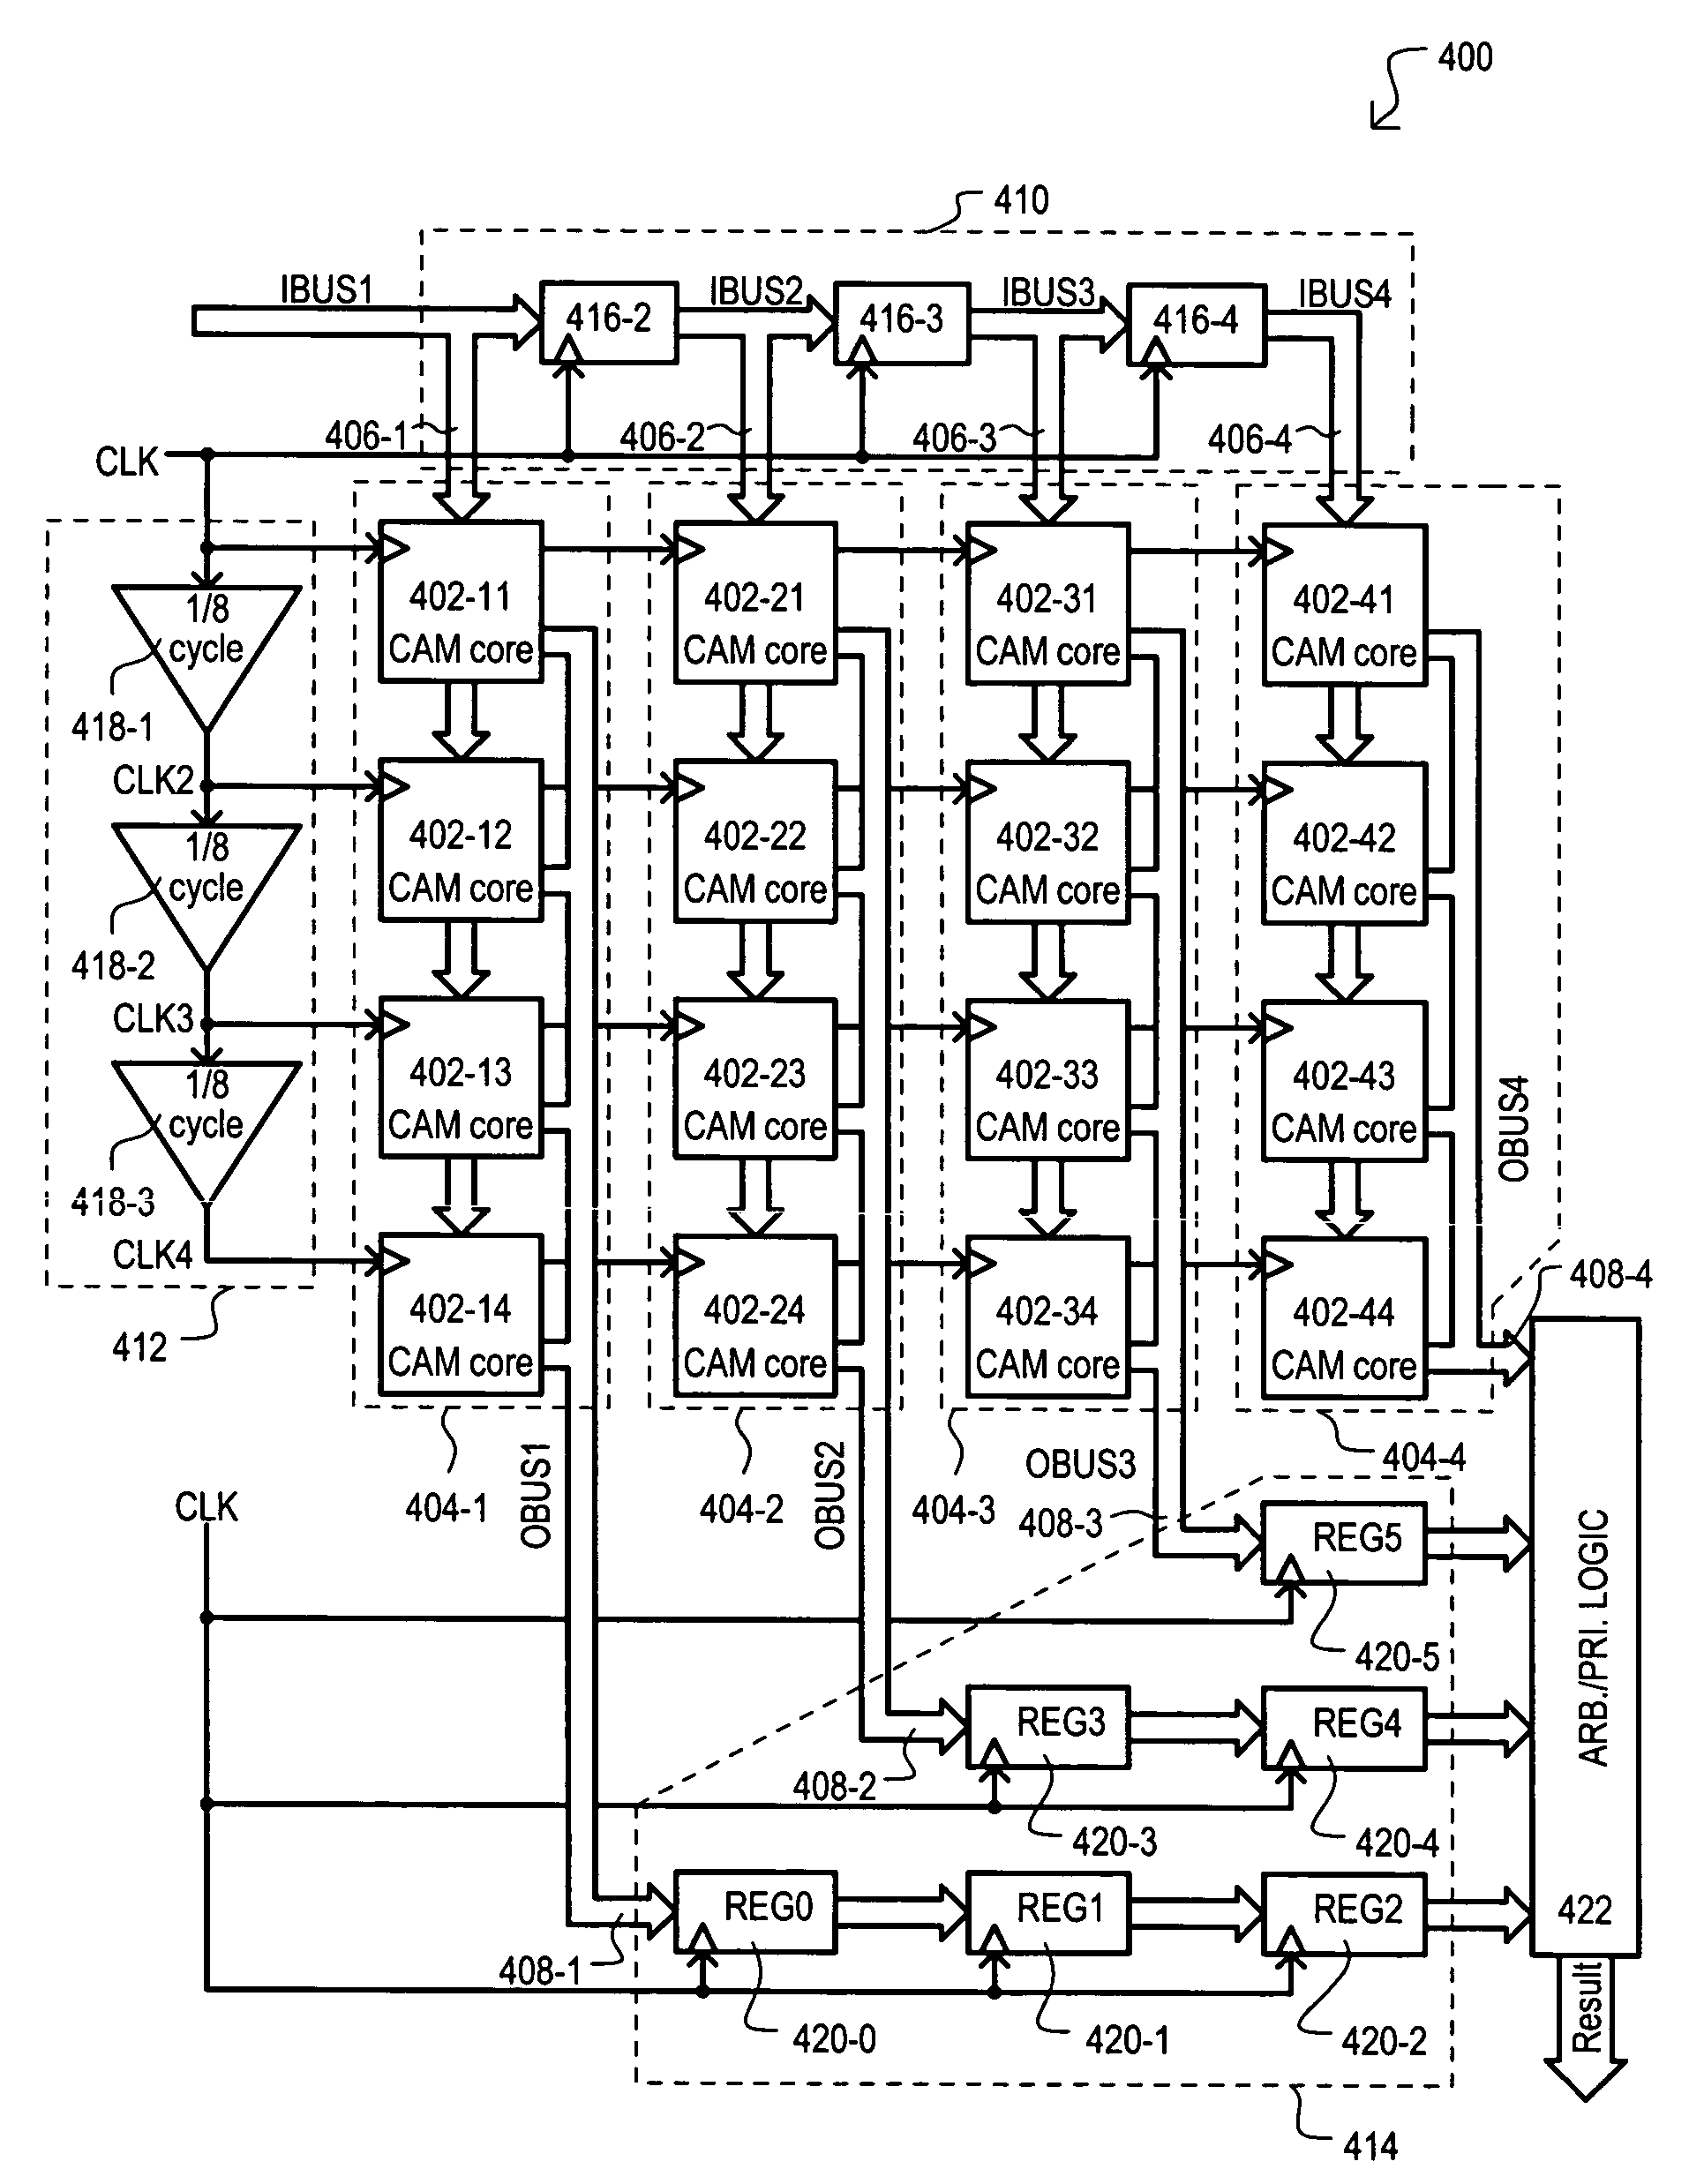 Reduced turn-on current content addressable memory (CAM) device and method